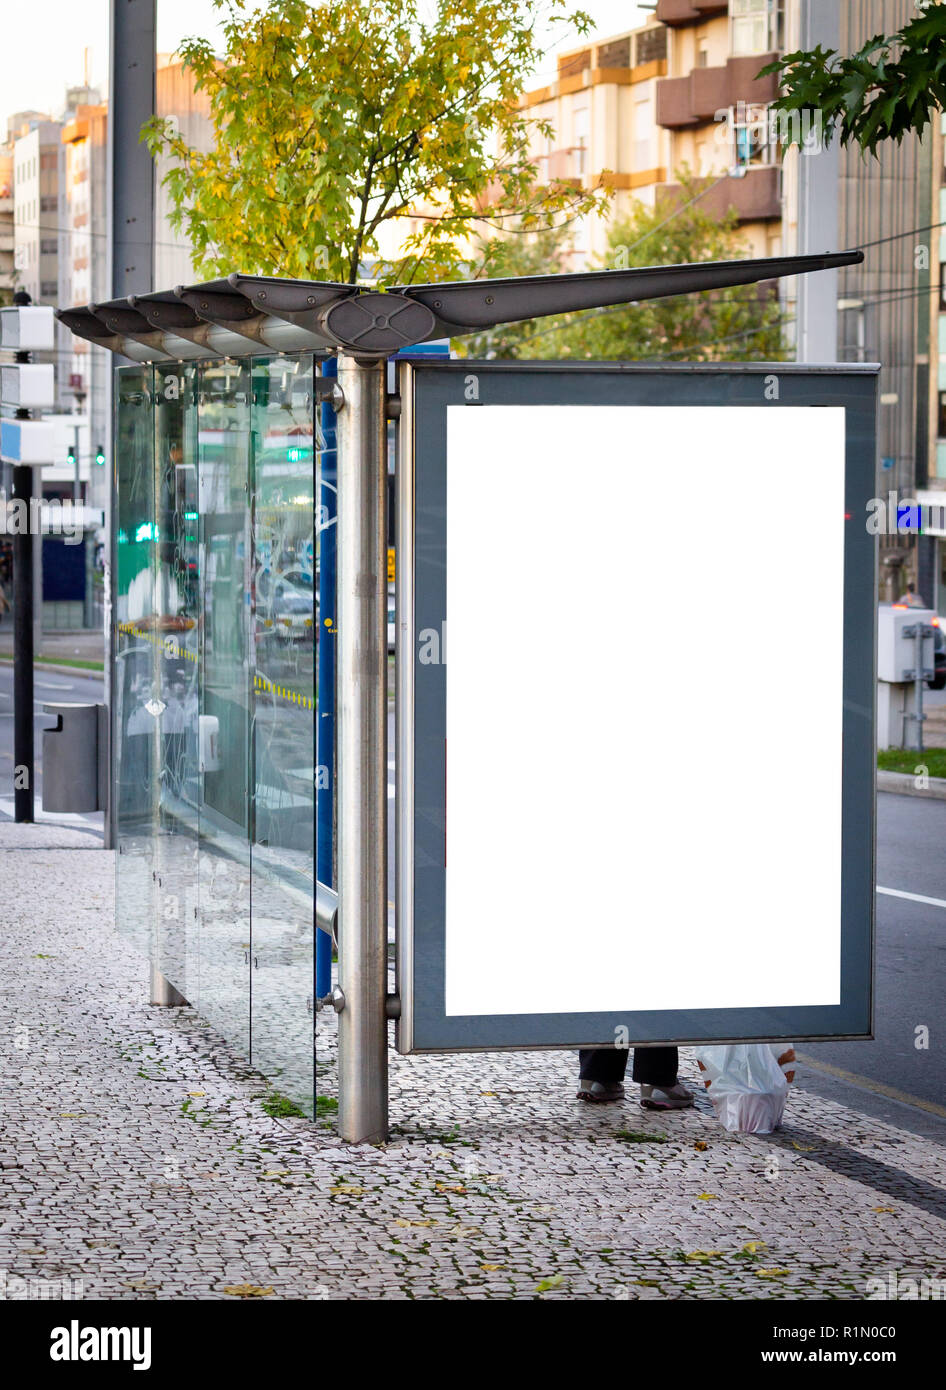 Vertical Bus Stop Advertisement Mockup. Street, Day. People Waiting. Copy Space. Stock Photo